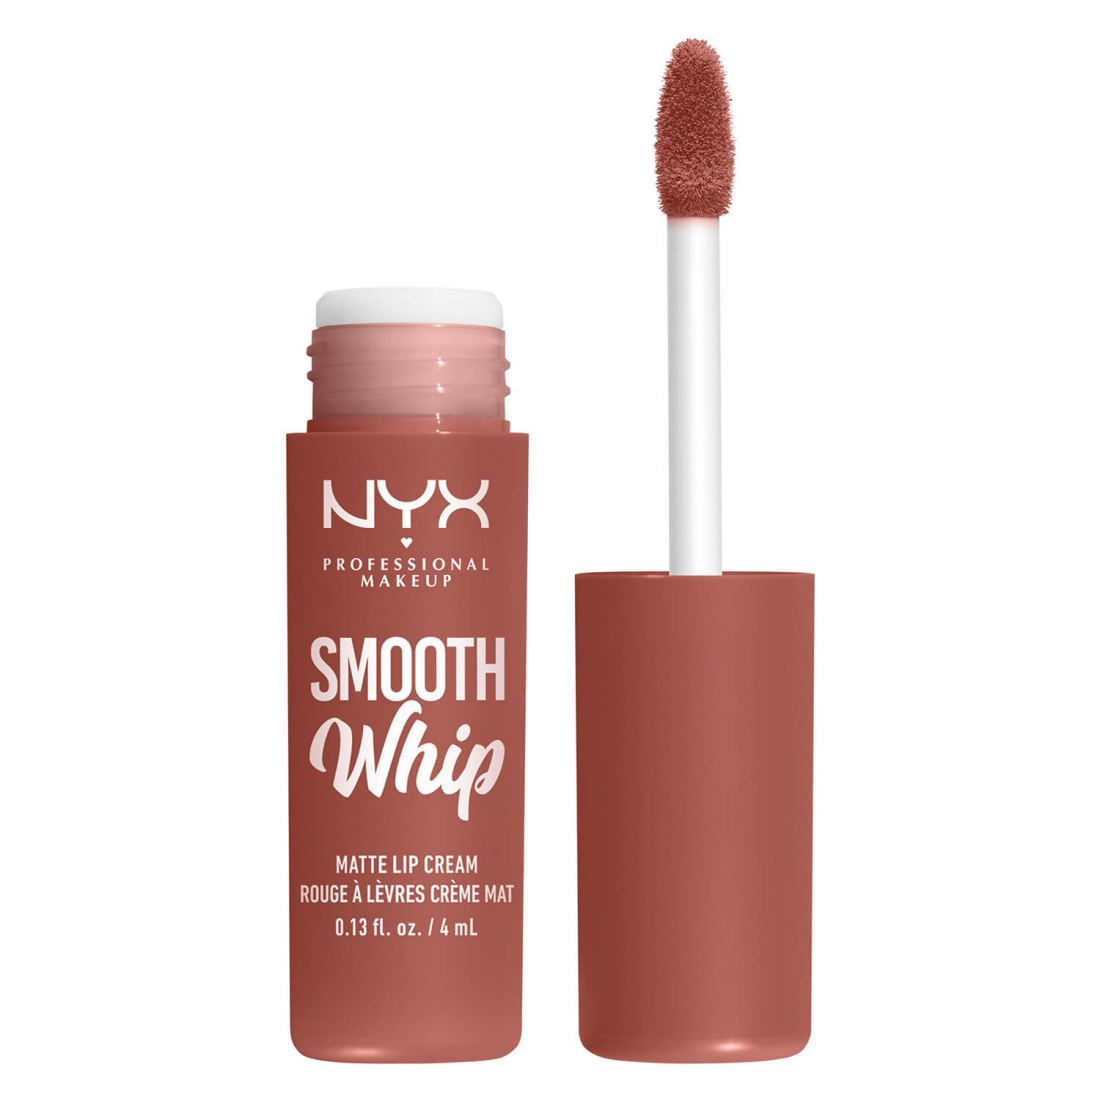 'Smooth Whipe Matte' Lippencreme - Teddy Fluff 4 ml